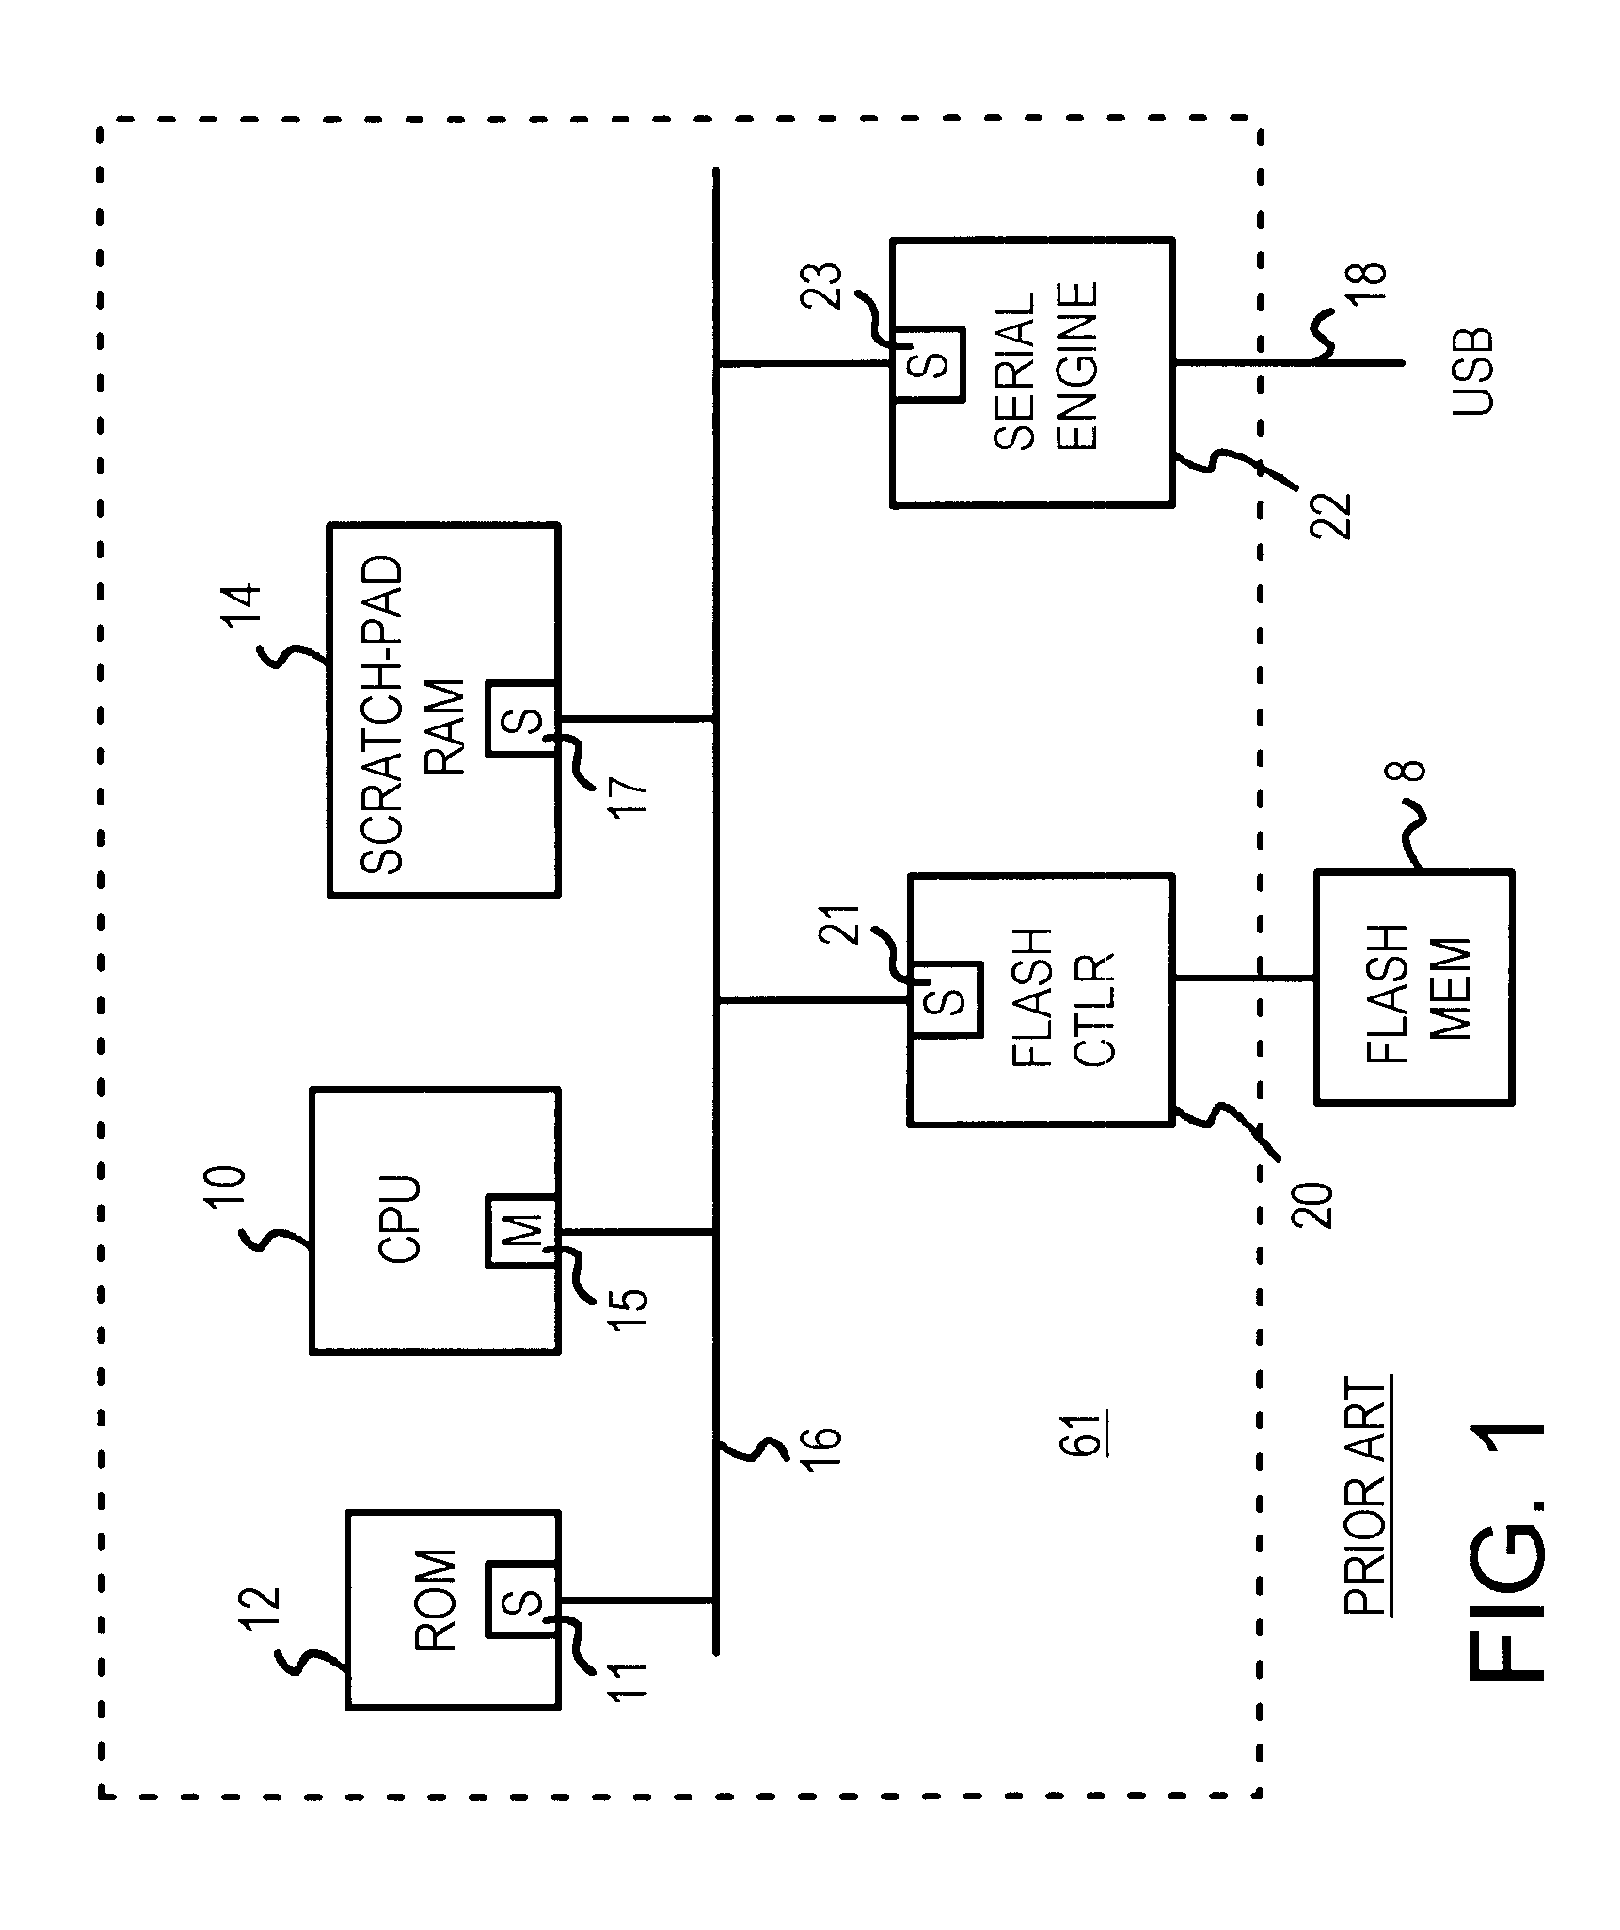 Flash drive/reader with serial-port controller and flash-memory controller mastering a second RAM-buffer bus parallel to a CPU bus